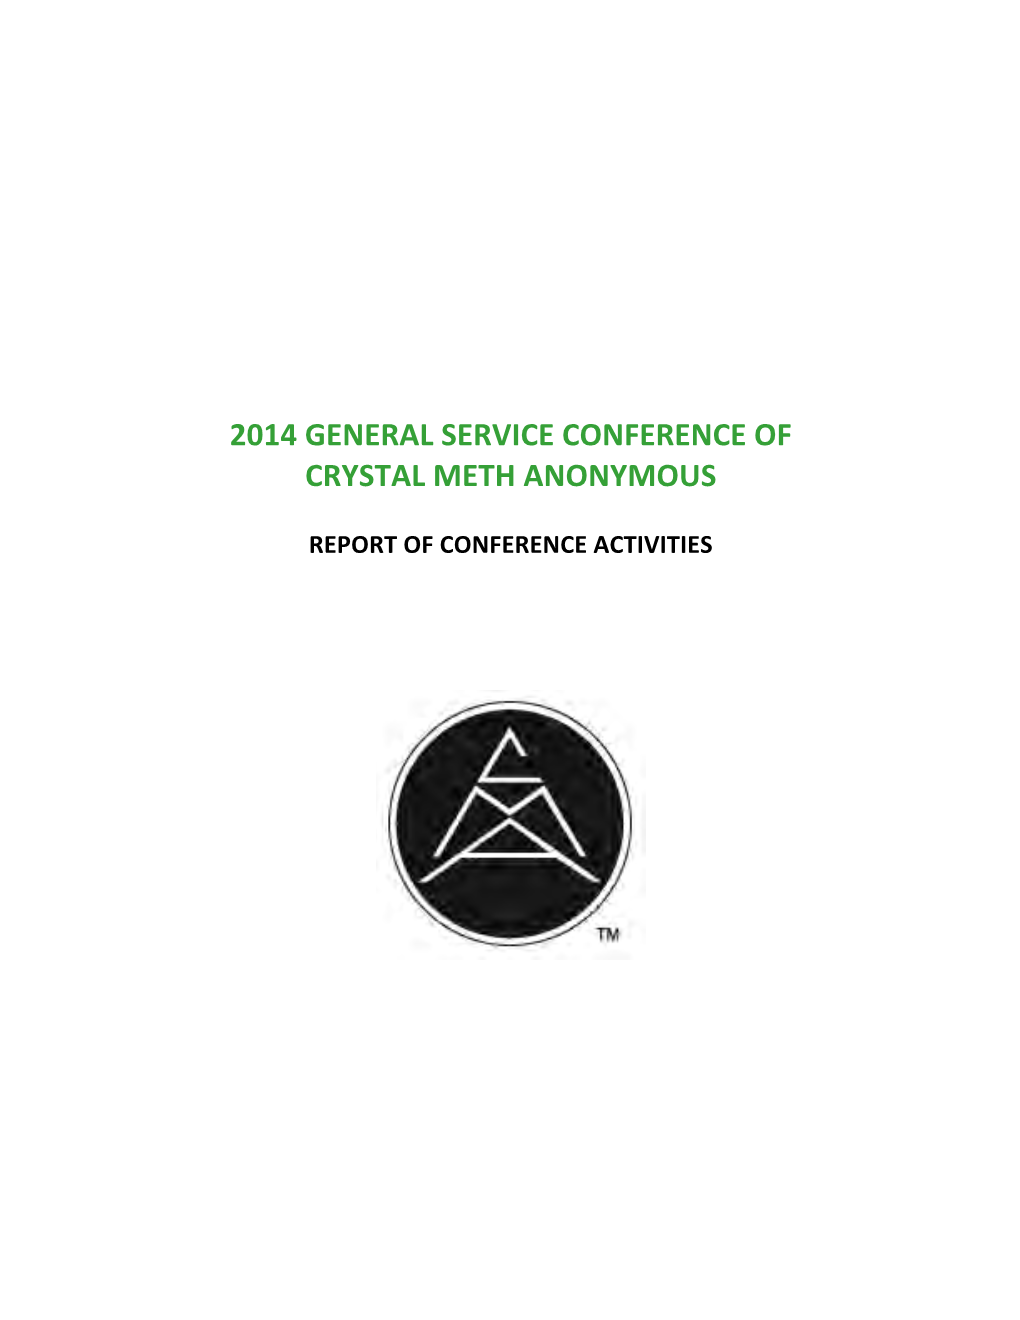 2014 General Service Conference of Crystal Meth Anonymous